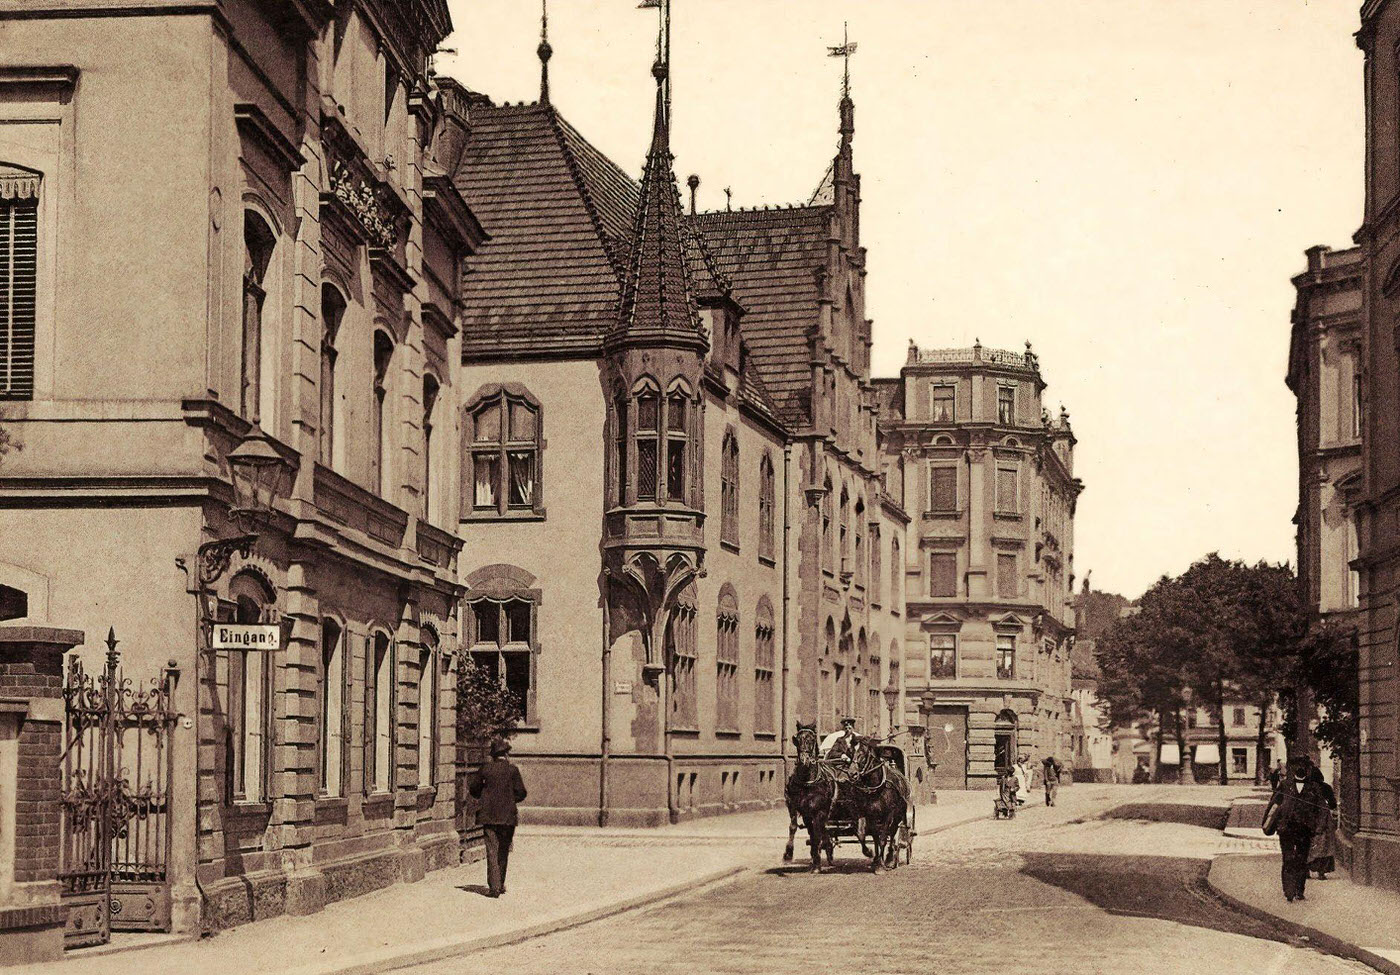 Horse-drawn carriages in Germany, Buildings in Dobeln, Germany, 1903.